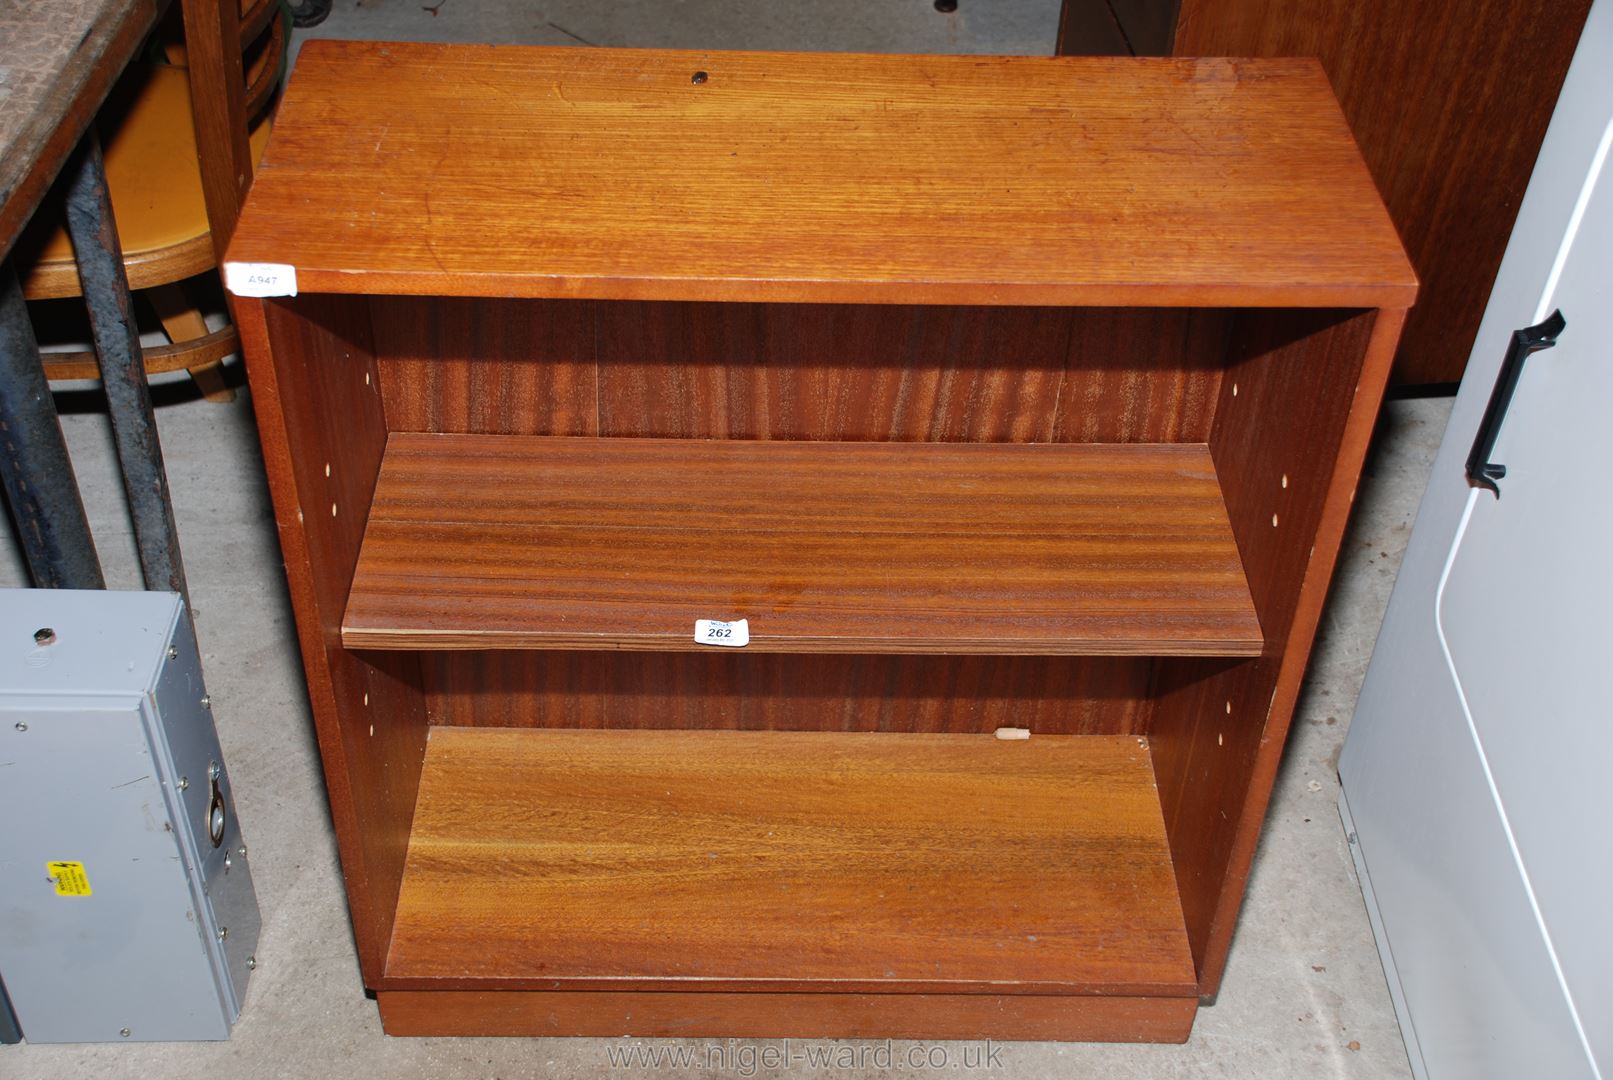 Wooden bookcase/display unit with adjustable shelf 27'' wide x 30'' high x 11'' deep.